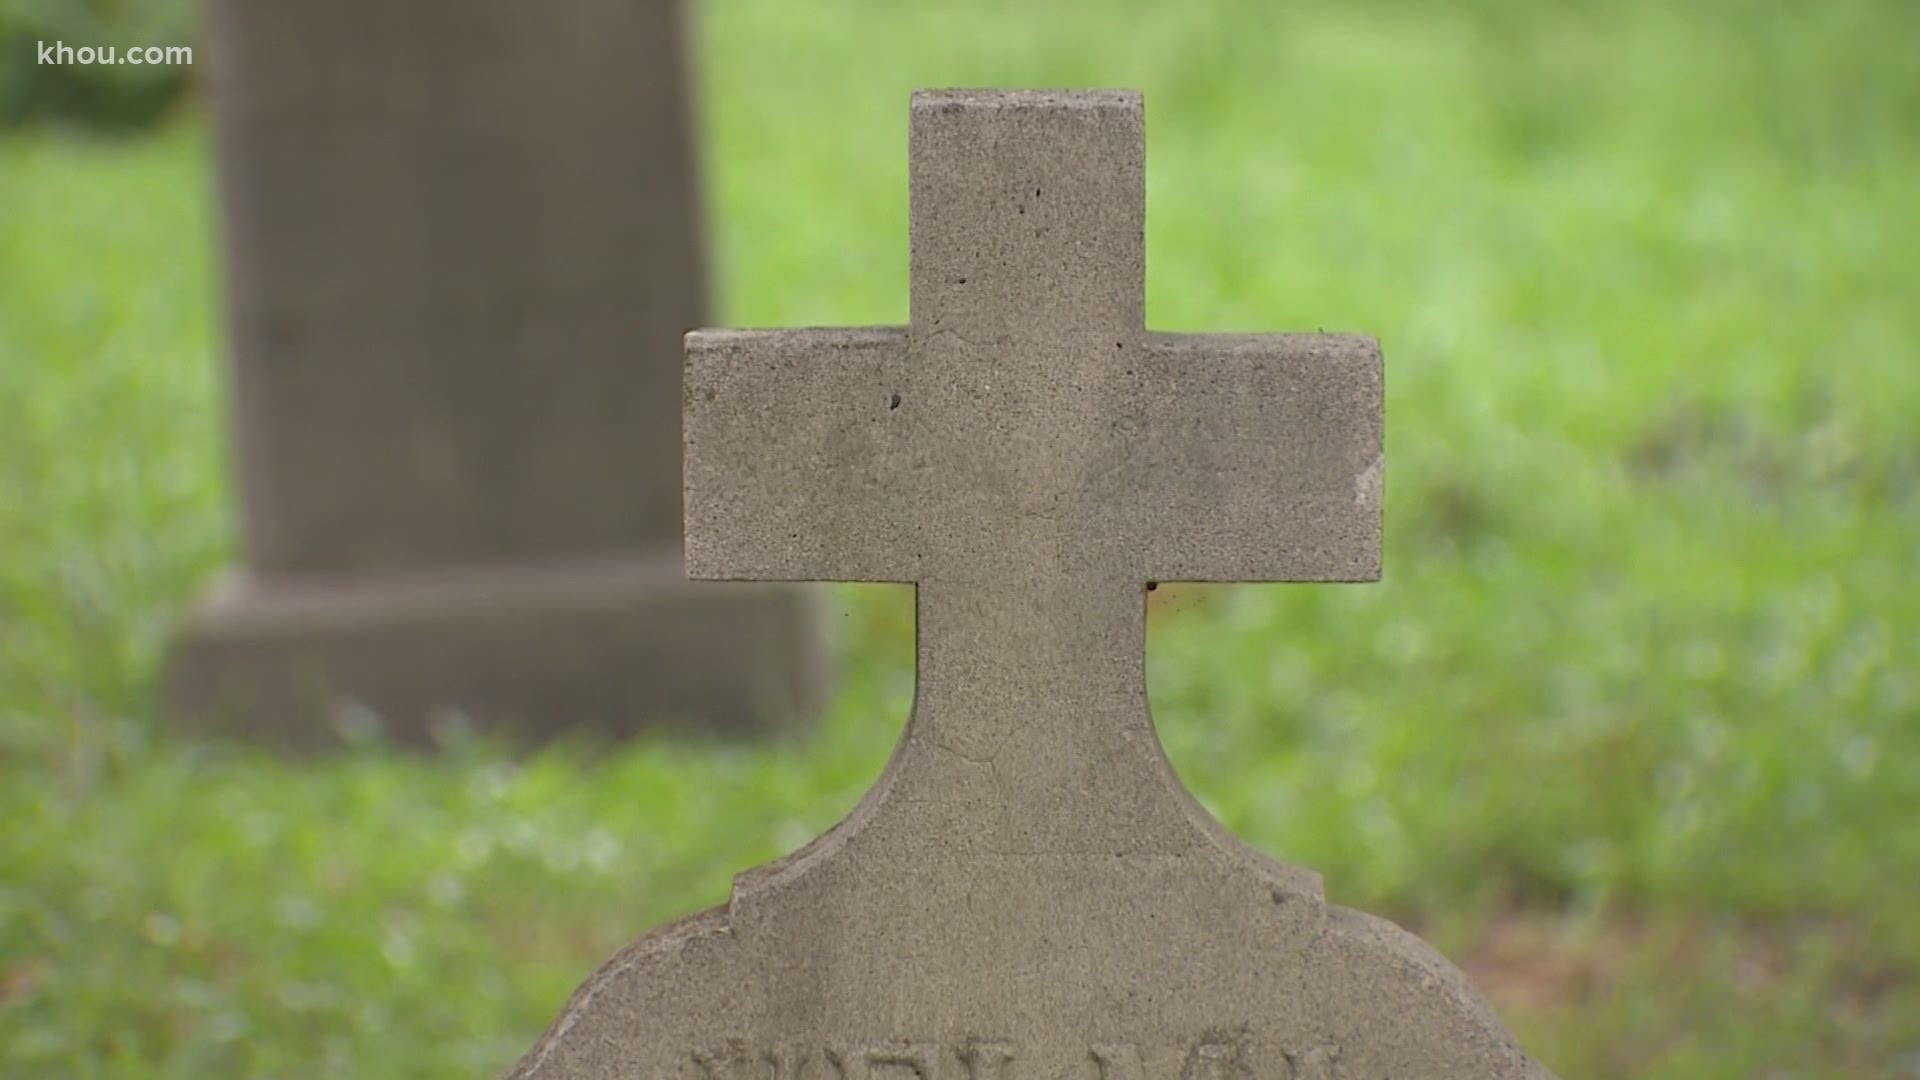 Some families across the Houston area have been waiting to bury their loved ones because funeral homes have been so busy during the coronavirus pandemic.